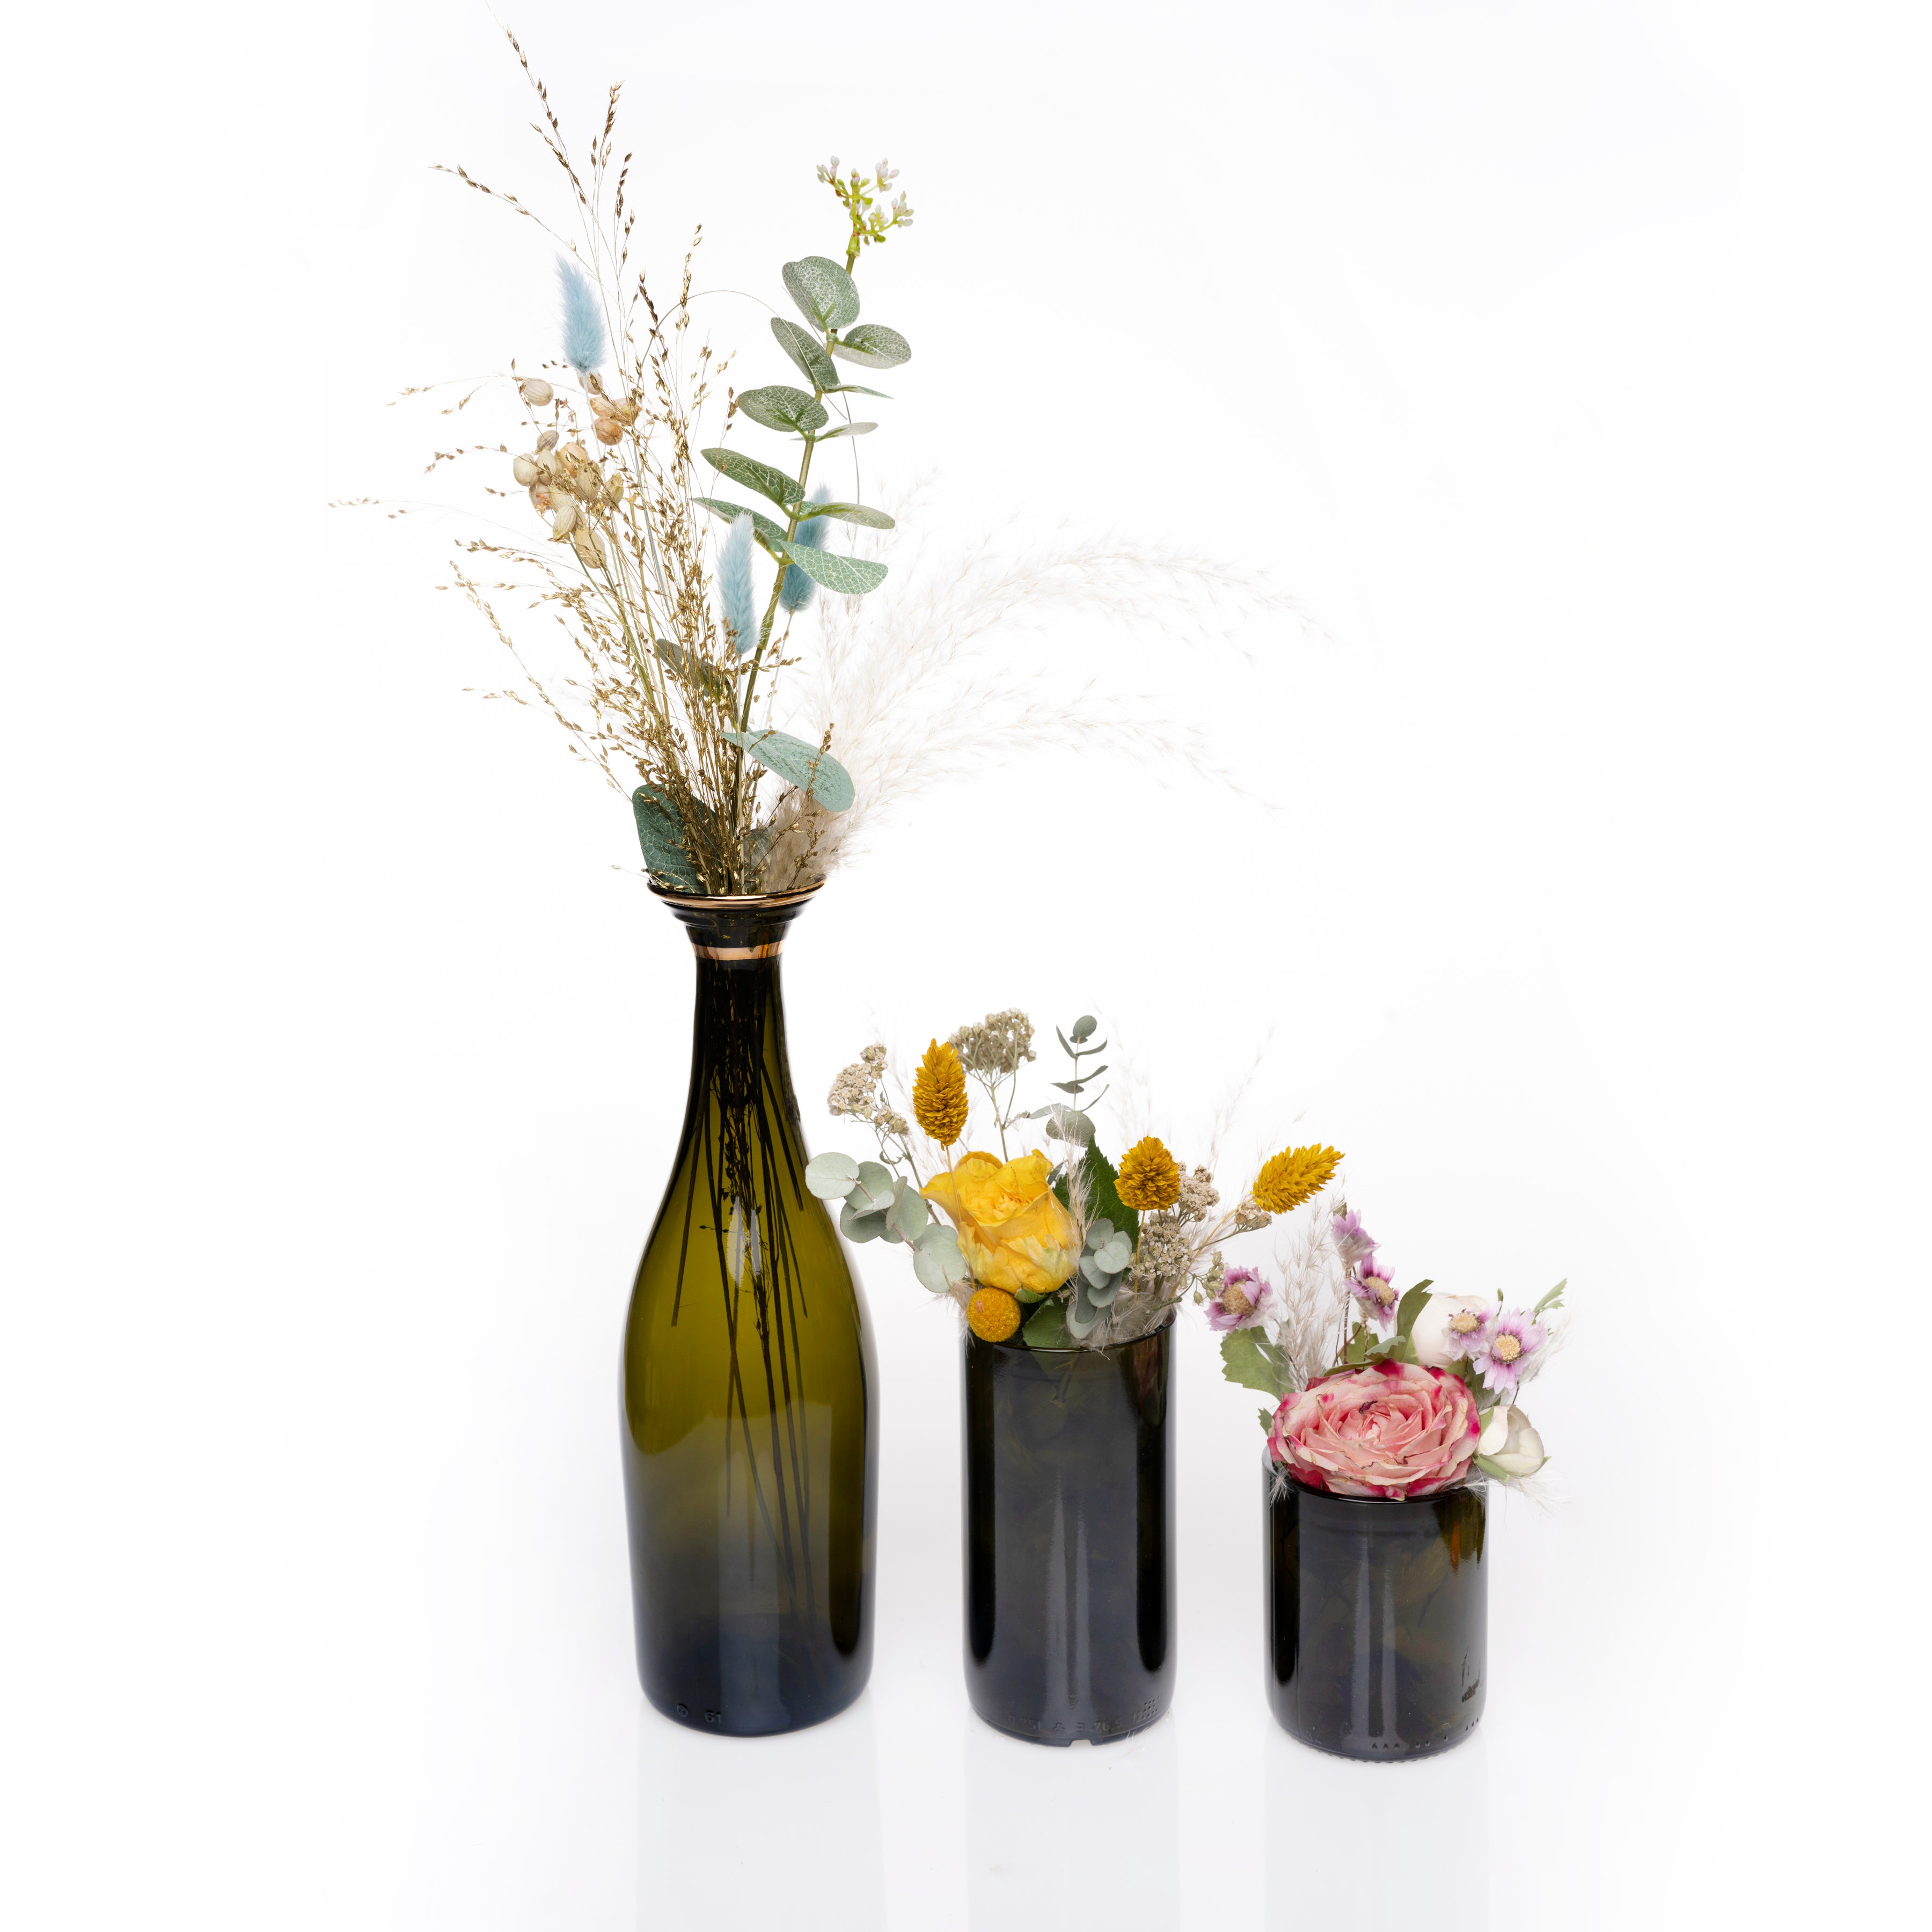 Vase aus Champagnerflasche - Upcycled Champagnerflaschenvase